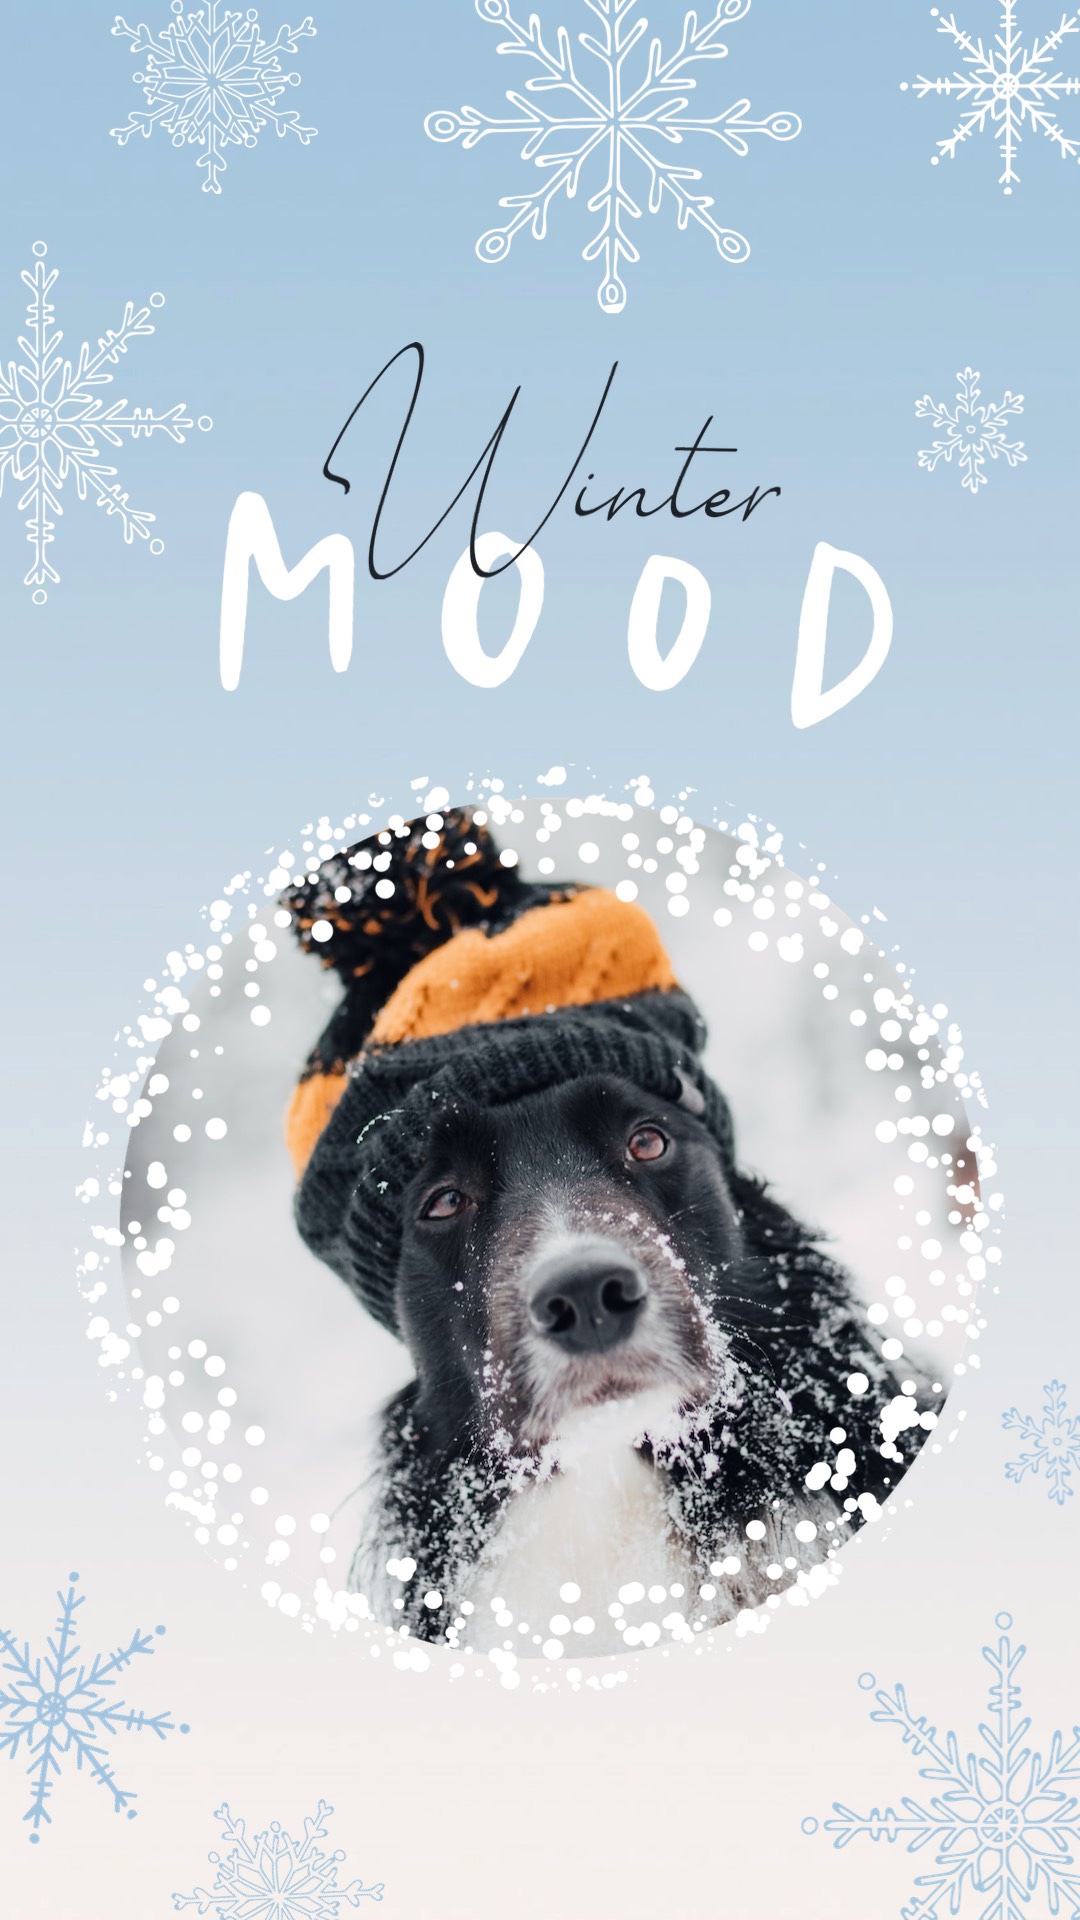 A Black And White Dog Wearing A Winter Hat Winter Story Template